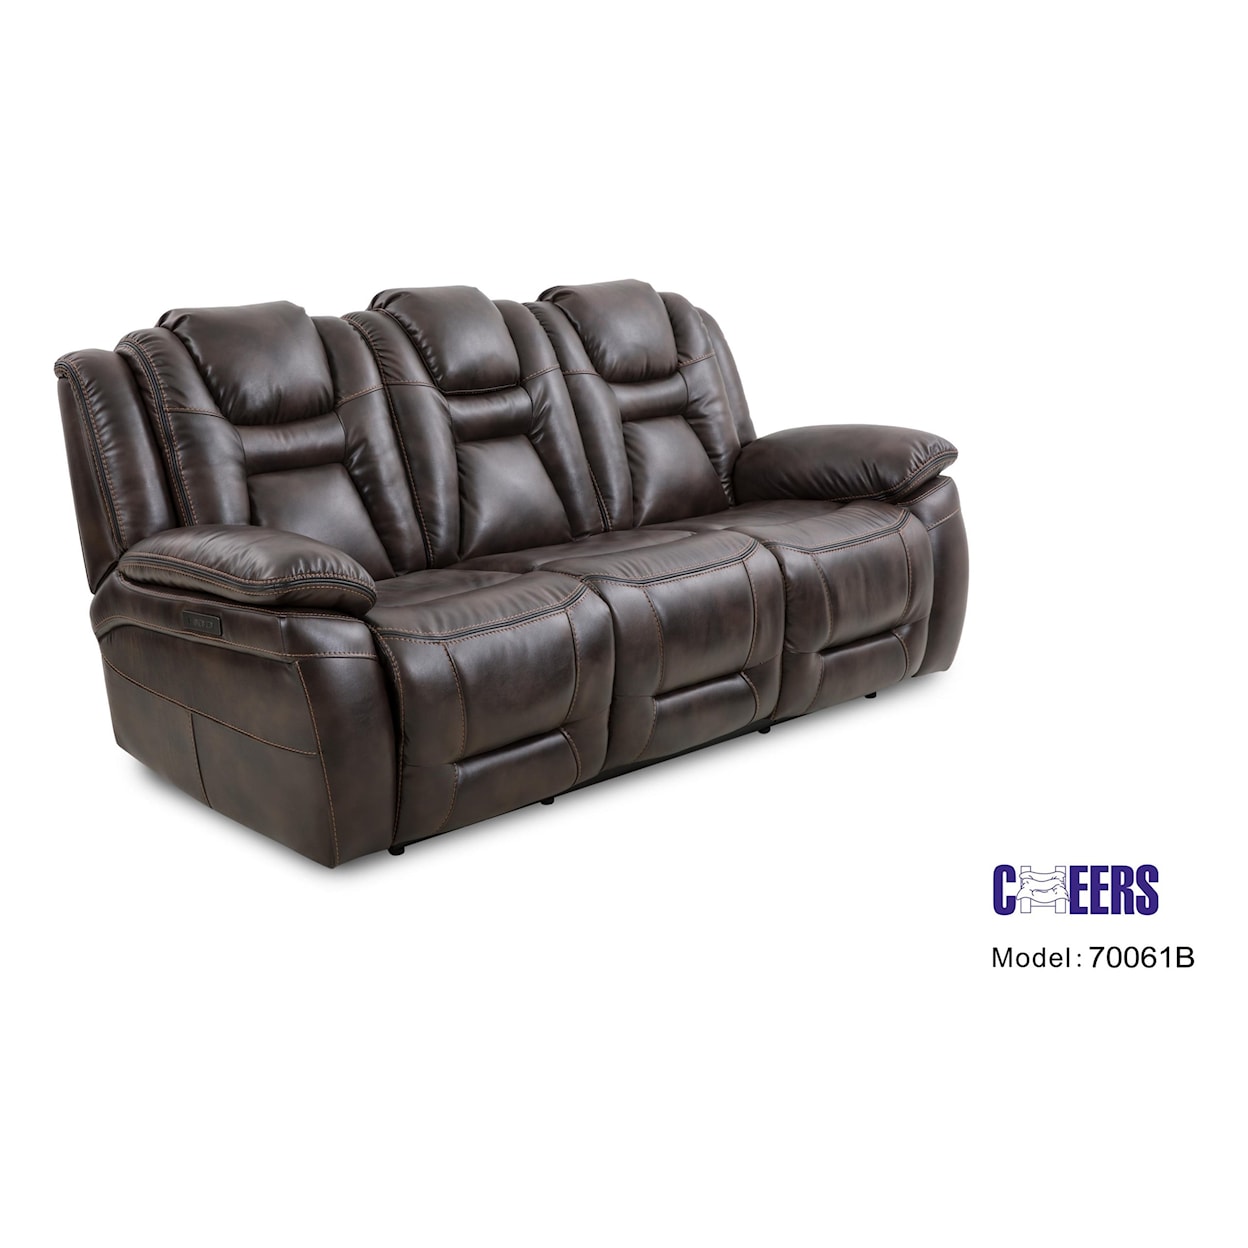 Cheers 70061 Dual Pwr Reclining Sofa with Power Headrest